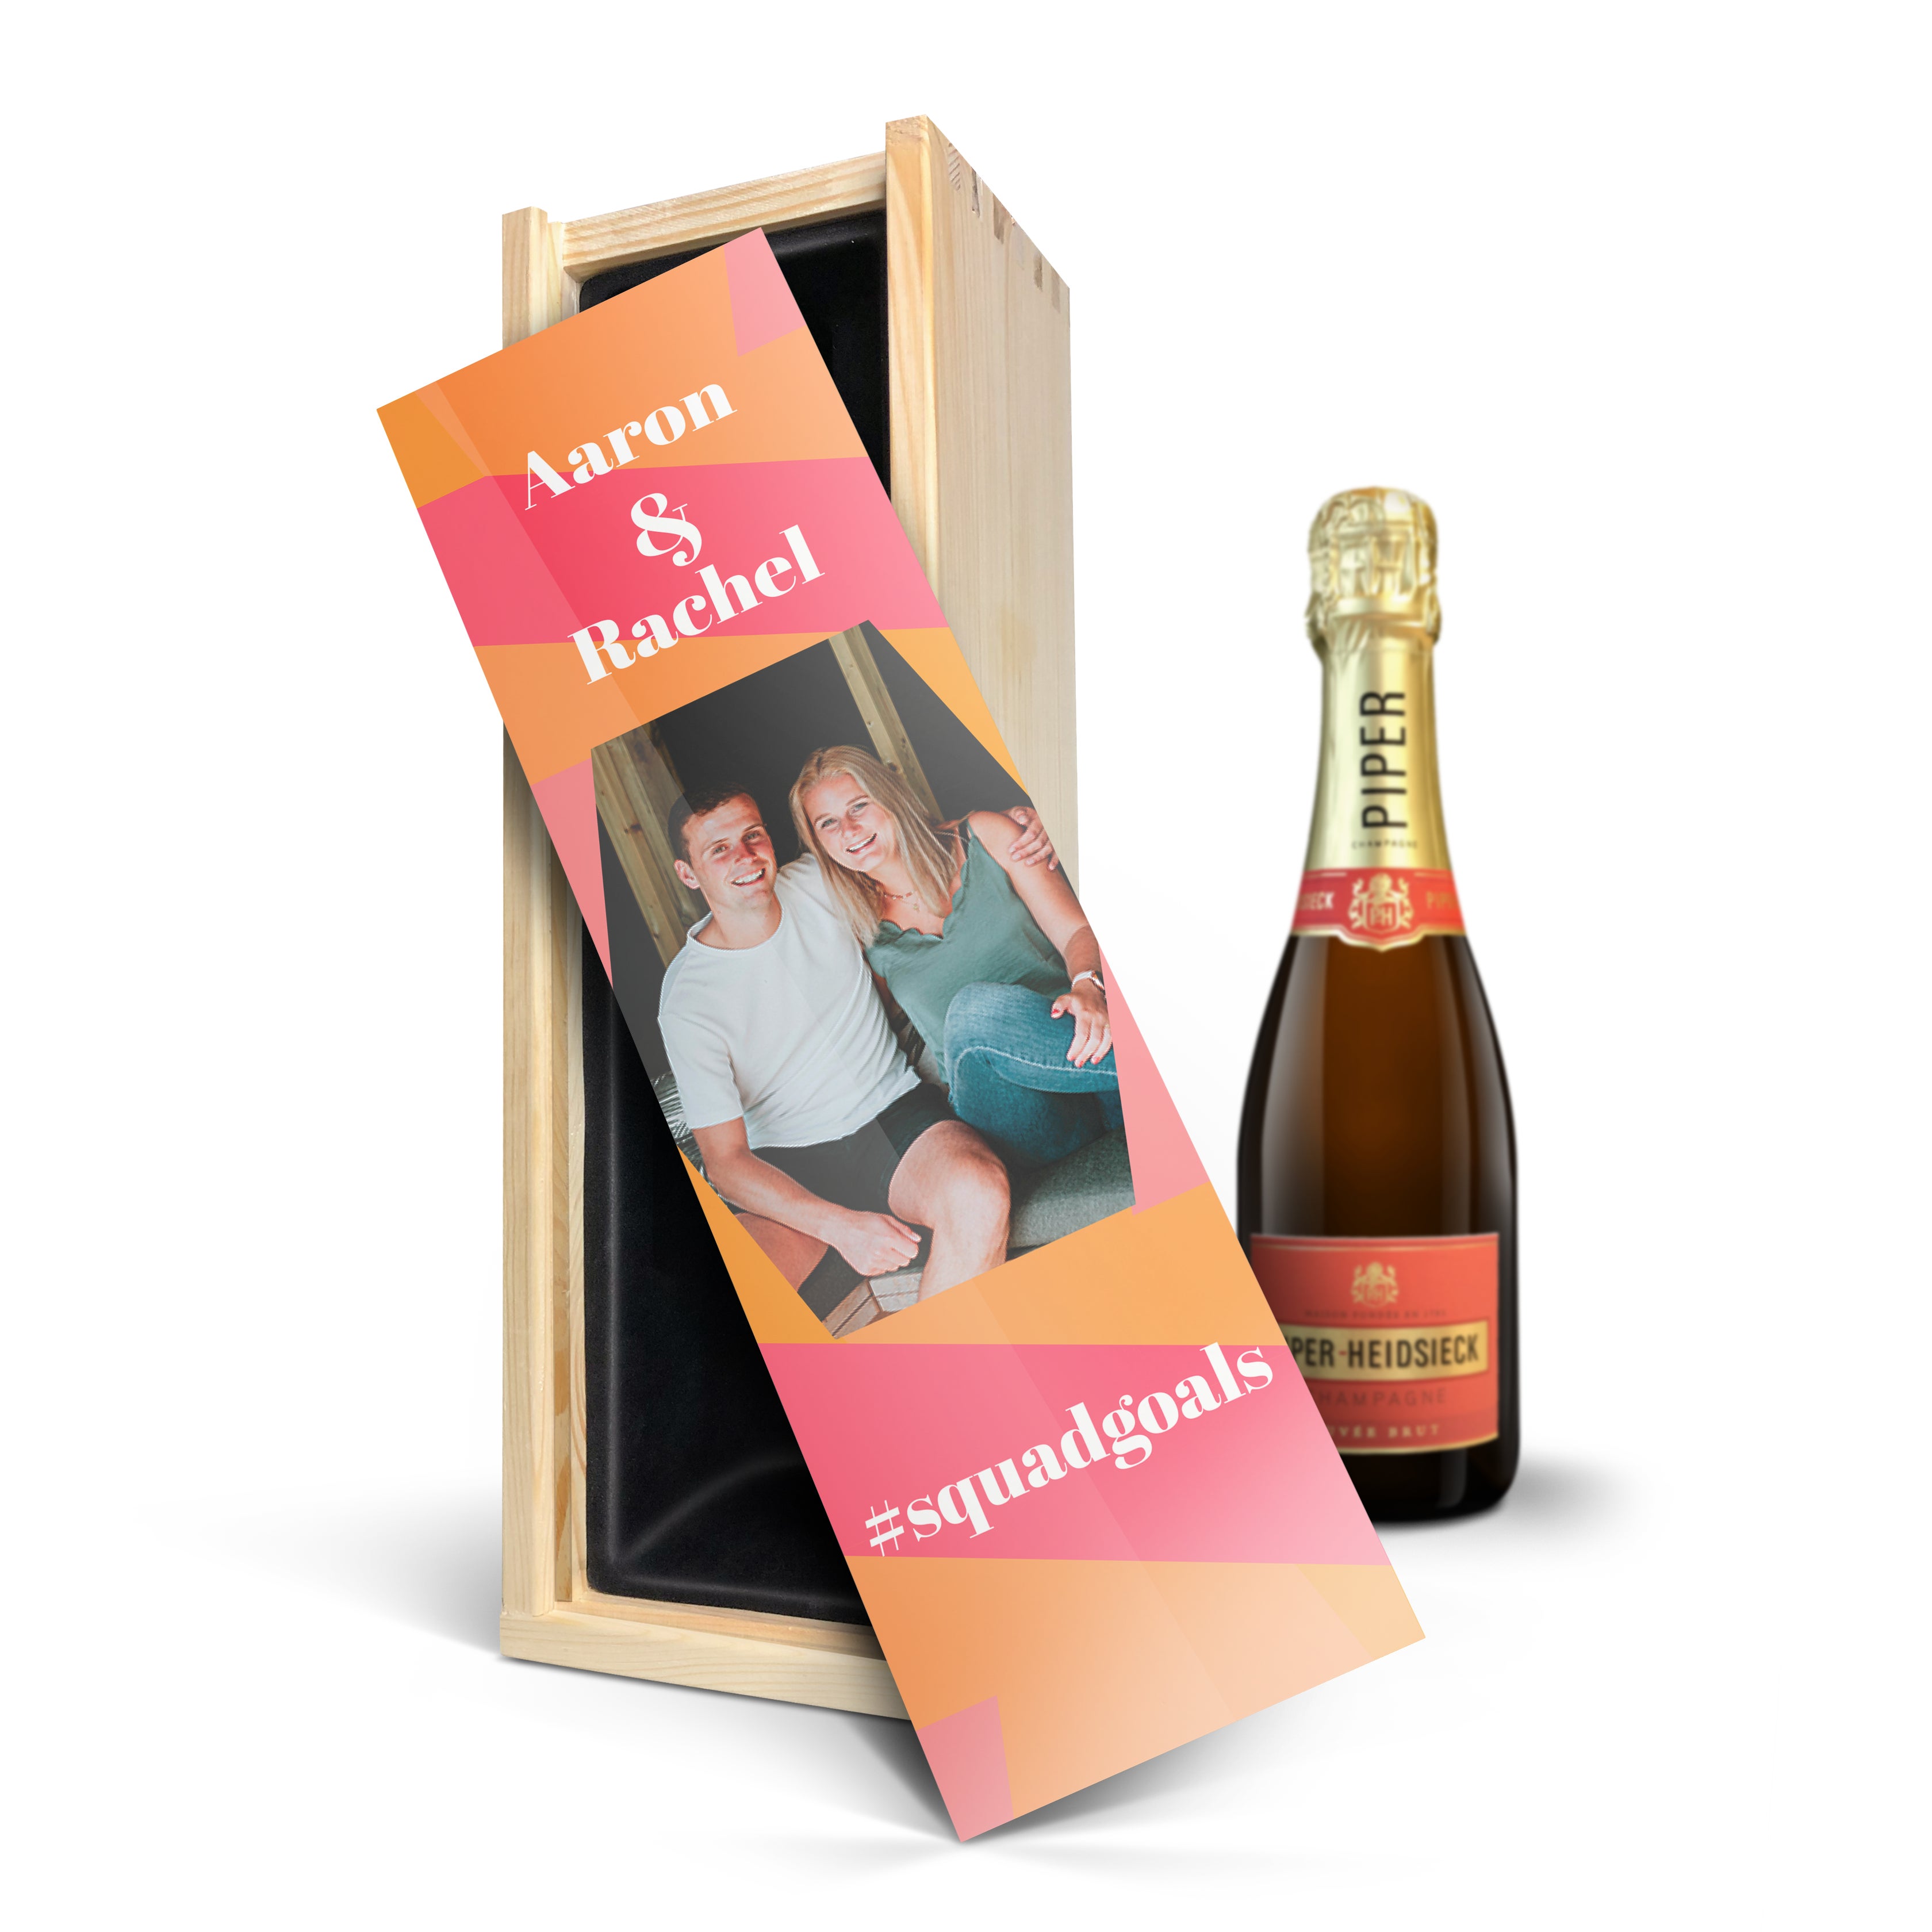 Personalised champagne gift - Piper Heidsieck Brut (375ml) - Printed wooden case